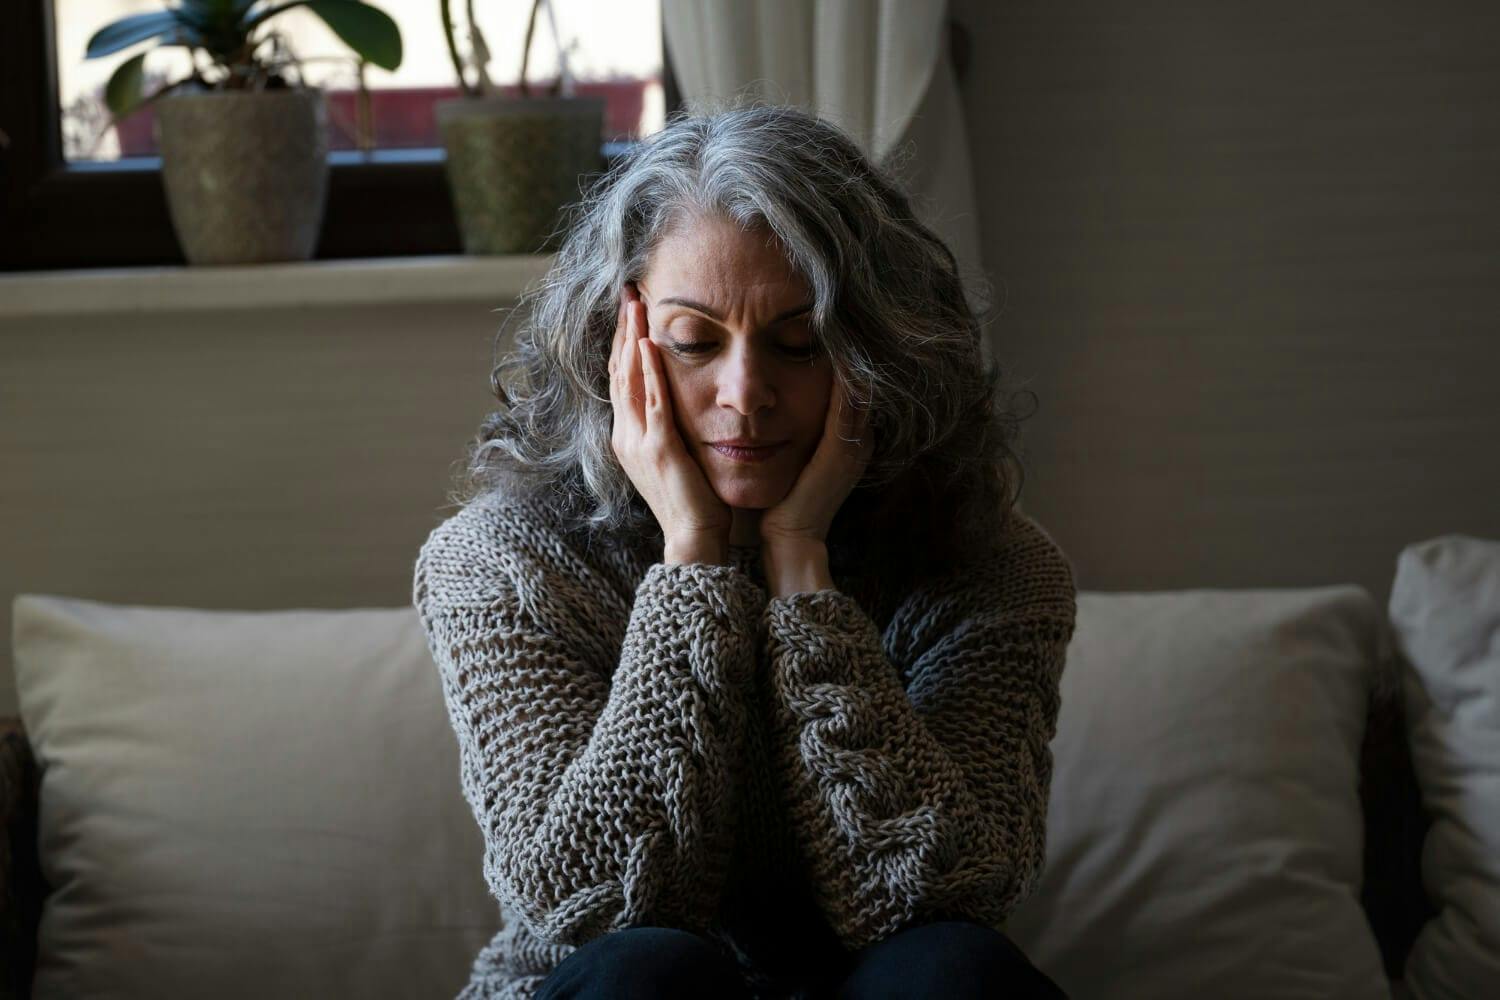 chronic stress - a lady with a gray hair placing her hand on head due to stress